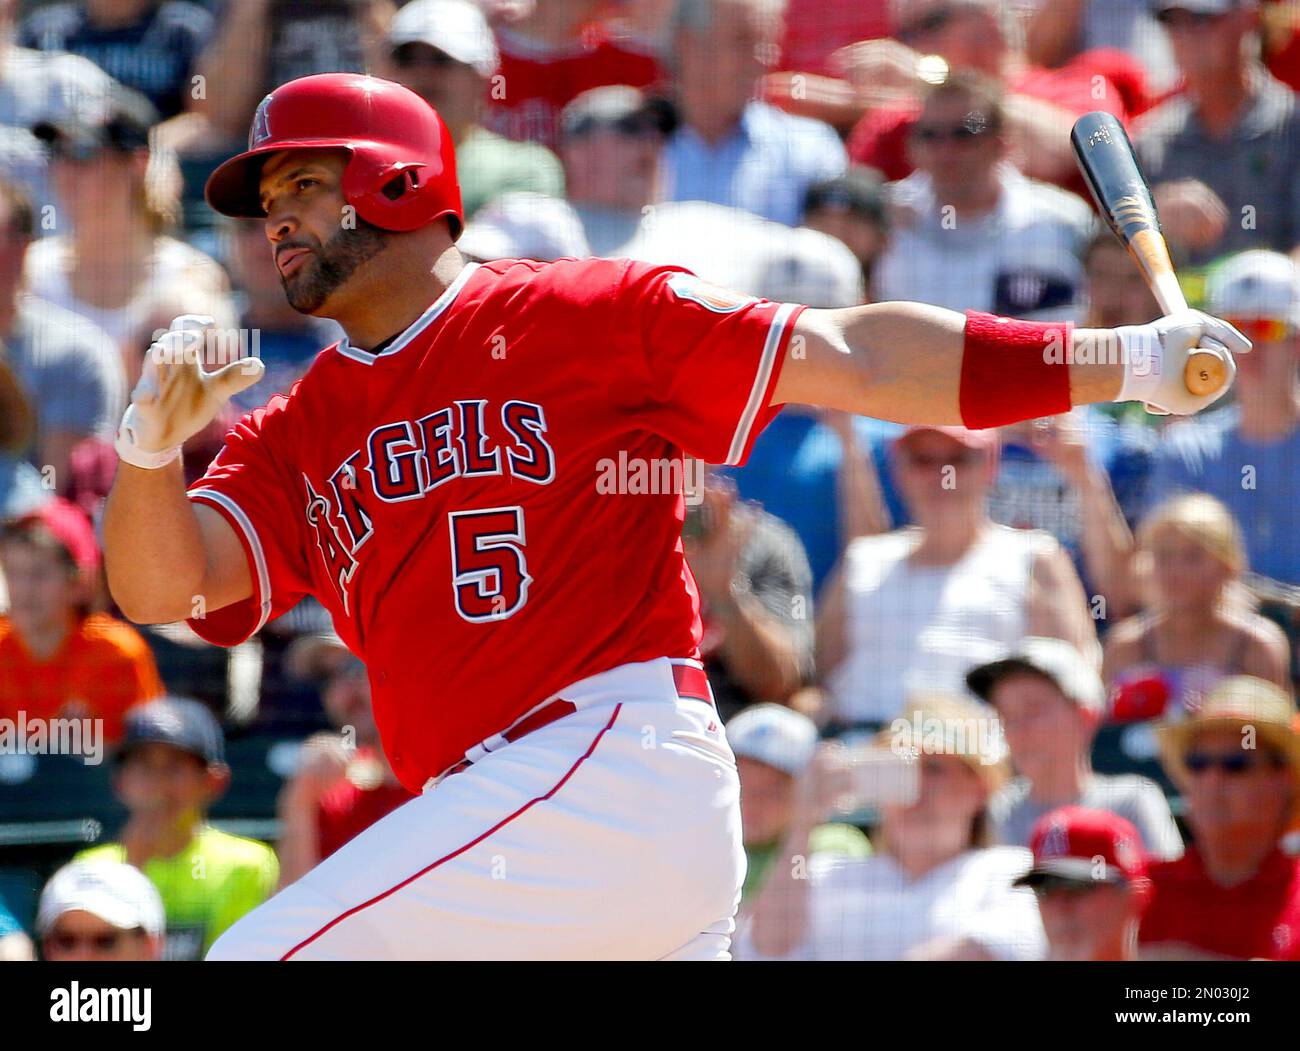 Creve Coeur, United States. 26th Jan, 2020. Los Angeles Angels Albert Pujols  is slowed by the opposing team as he plays in the Albert Pujols All Stars  basketball game at Missouri Baptist